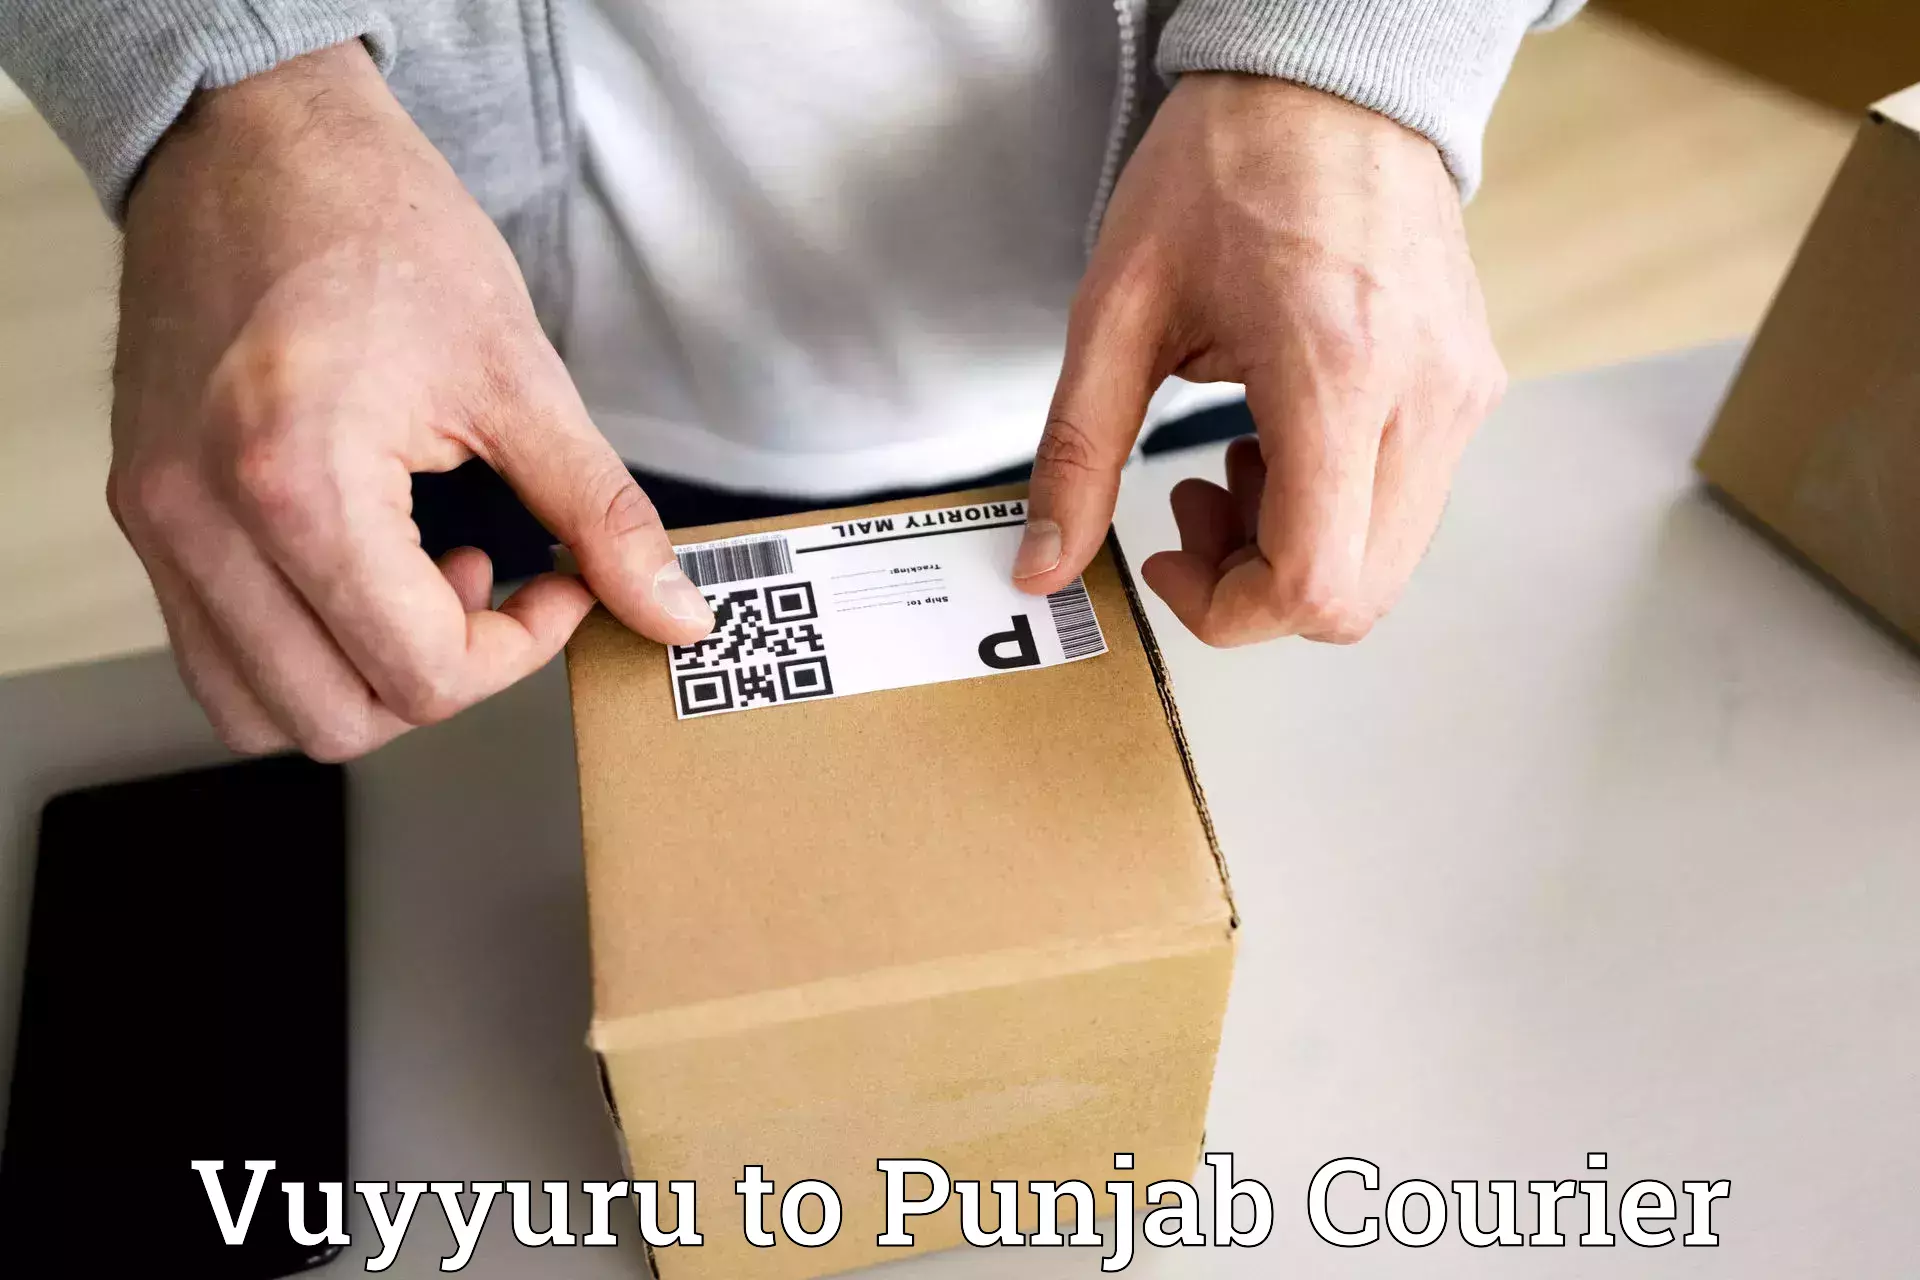 Rural area delivery Vuyyuru to Punjab